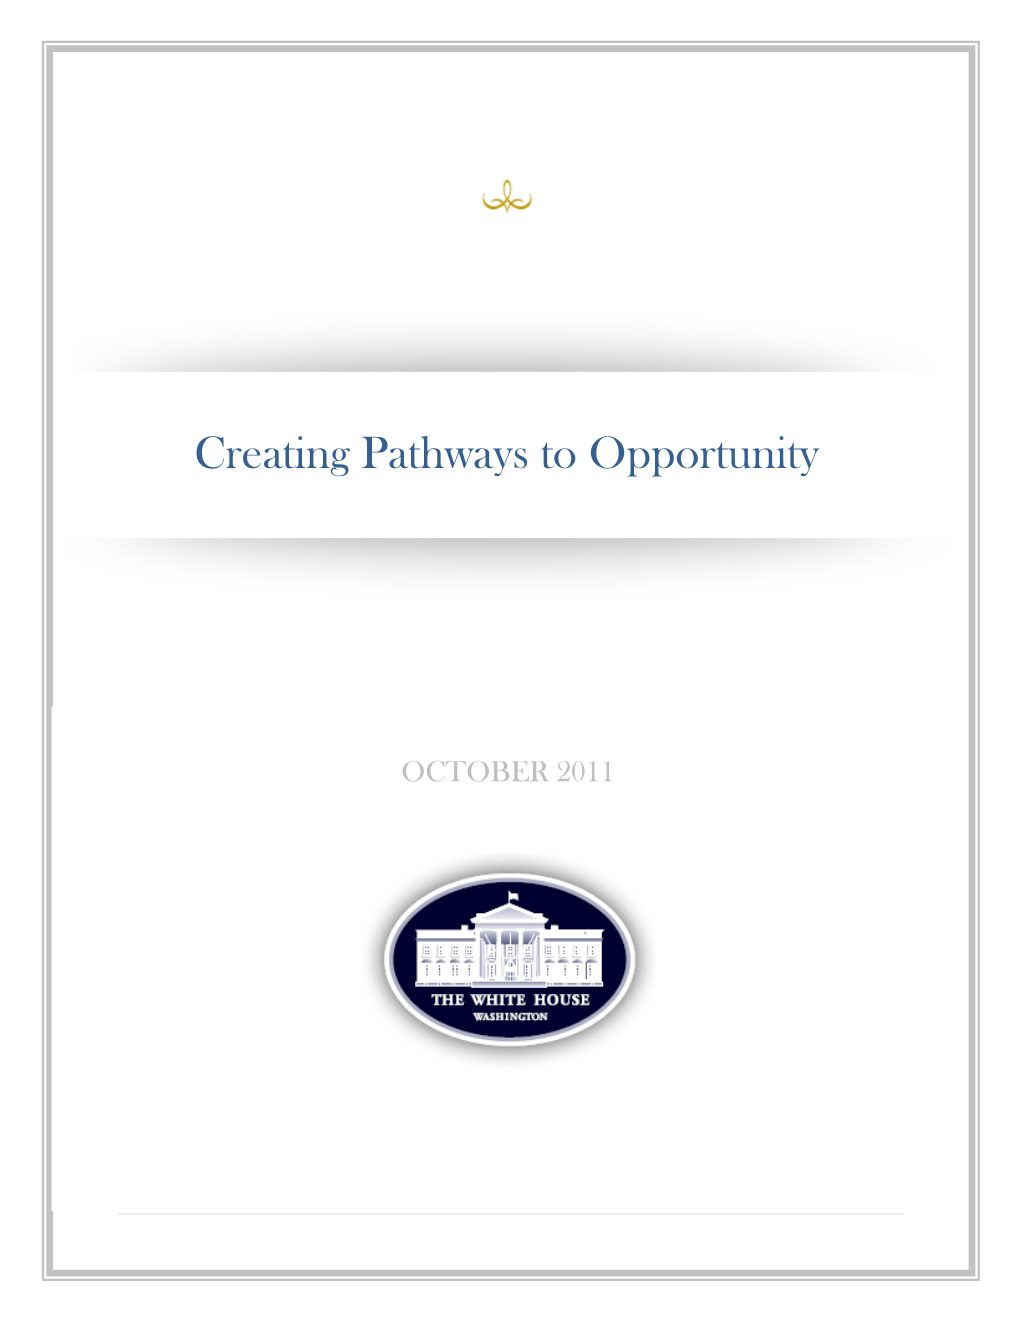 Creating Pathways to Opportunity